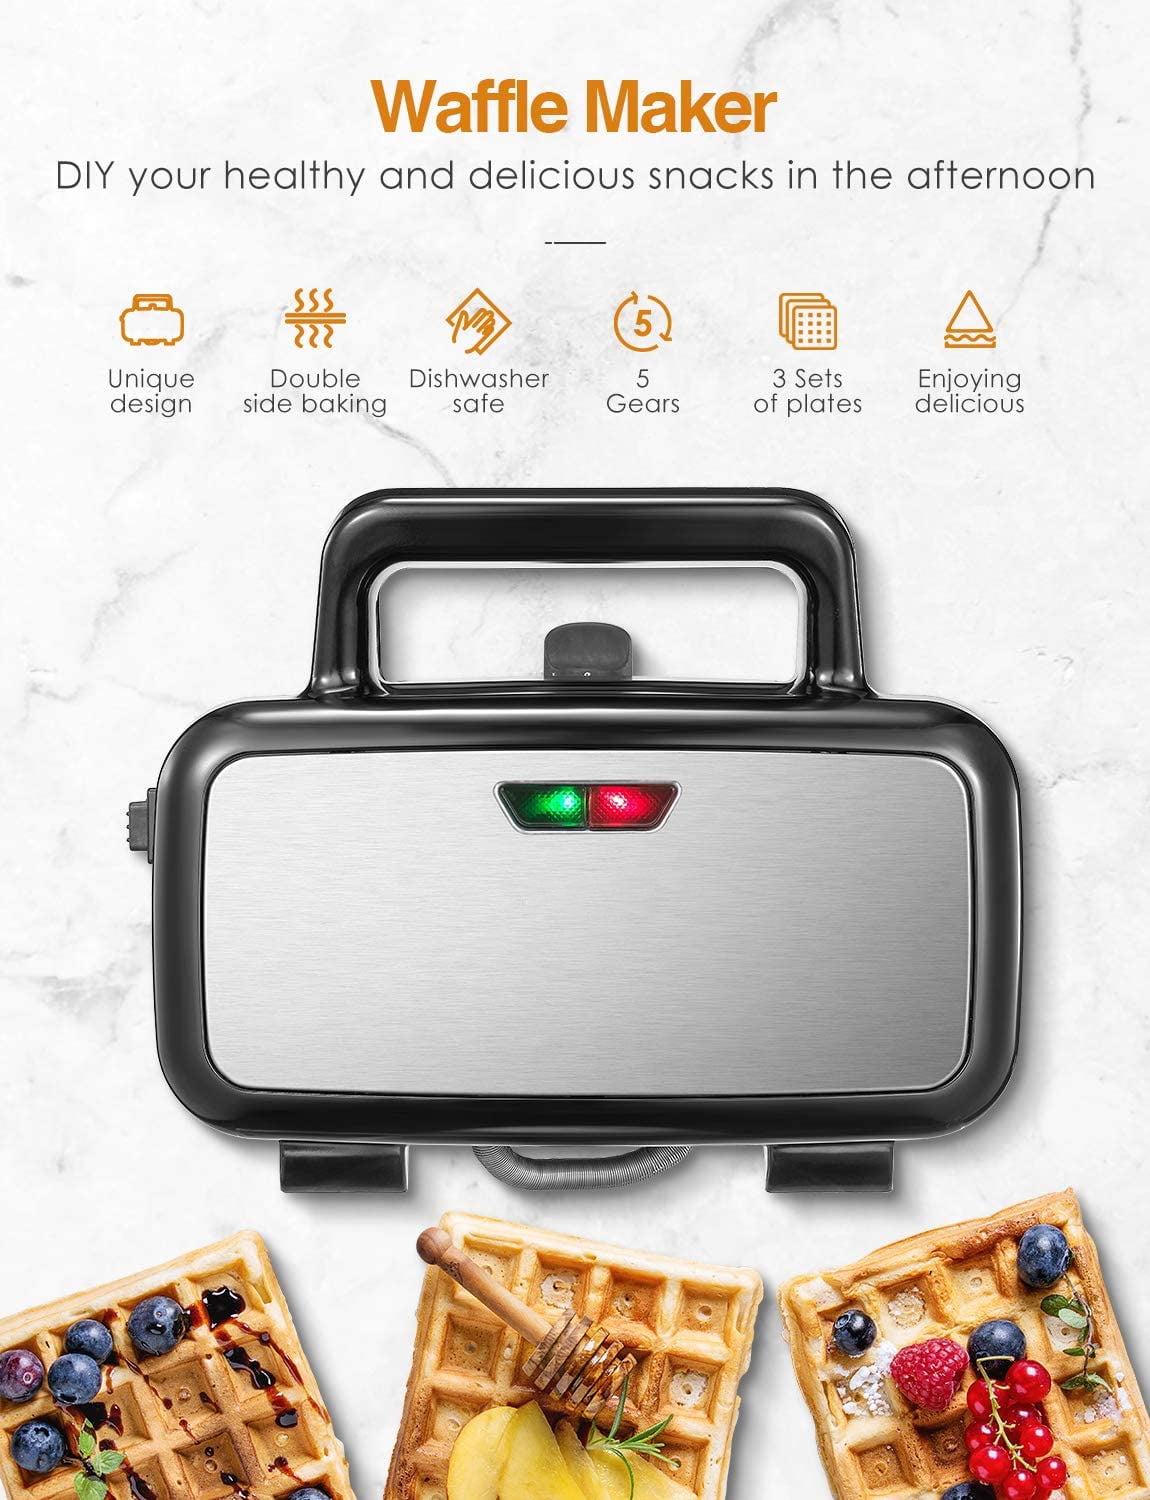 HOUSNAT 3 in 1 Sandwich Maker, Waffle Maker with Removable Plates, 120